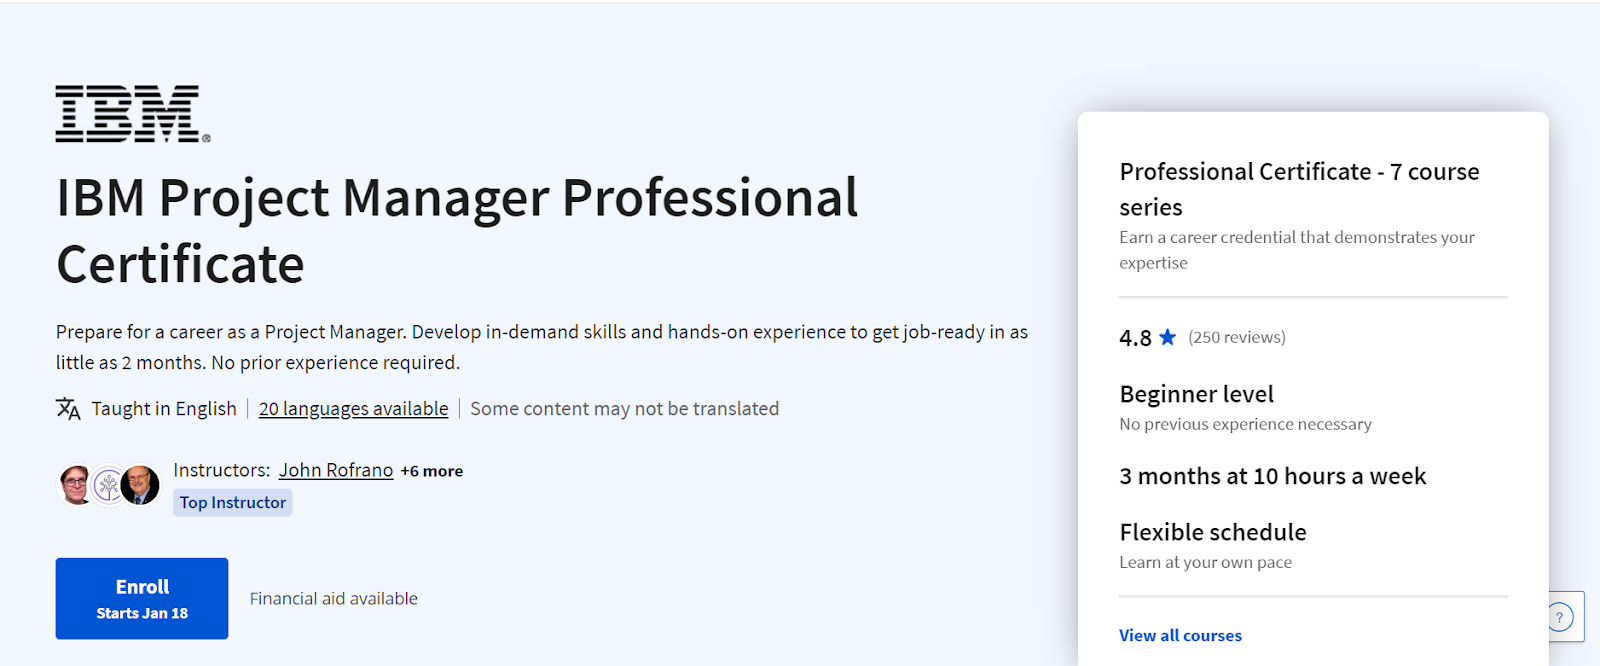 BM Project Manager Professional Certificate